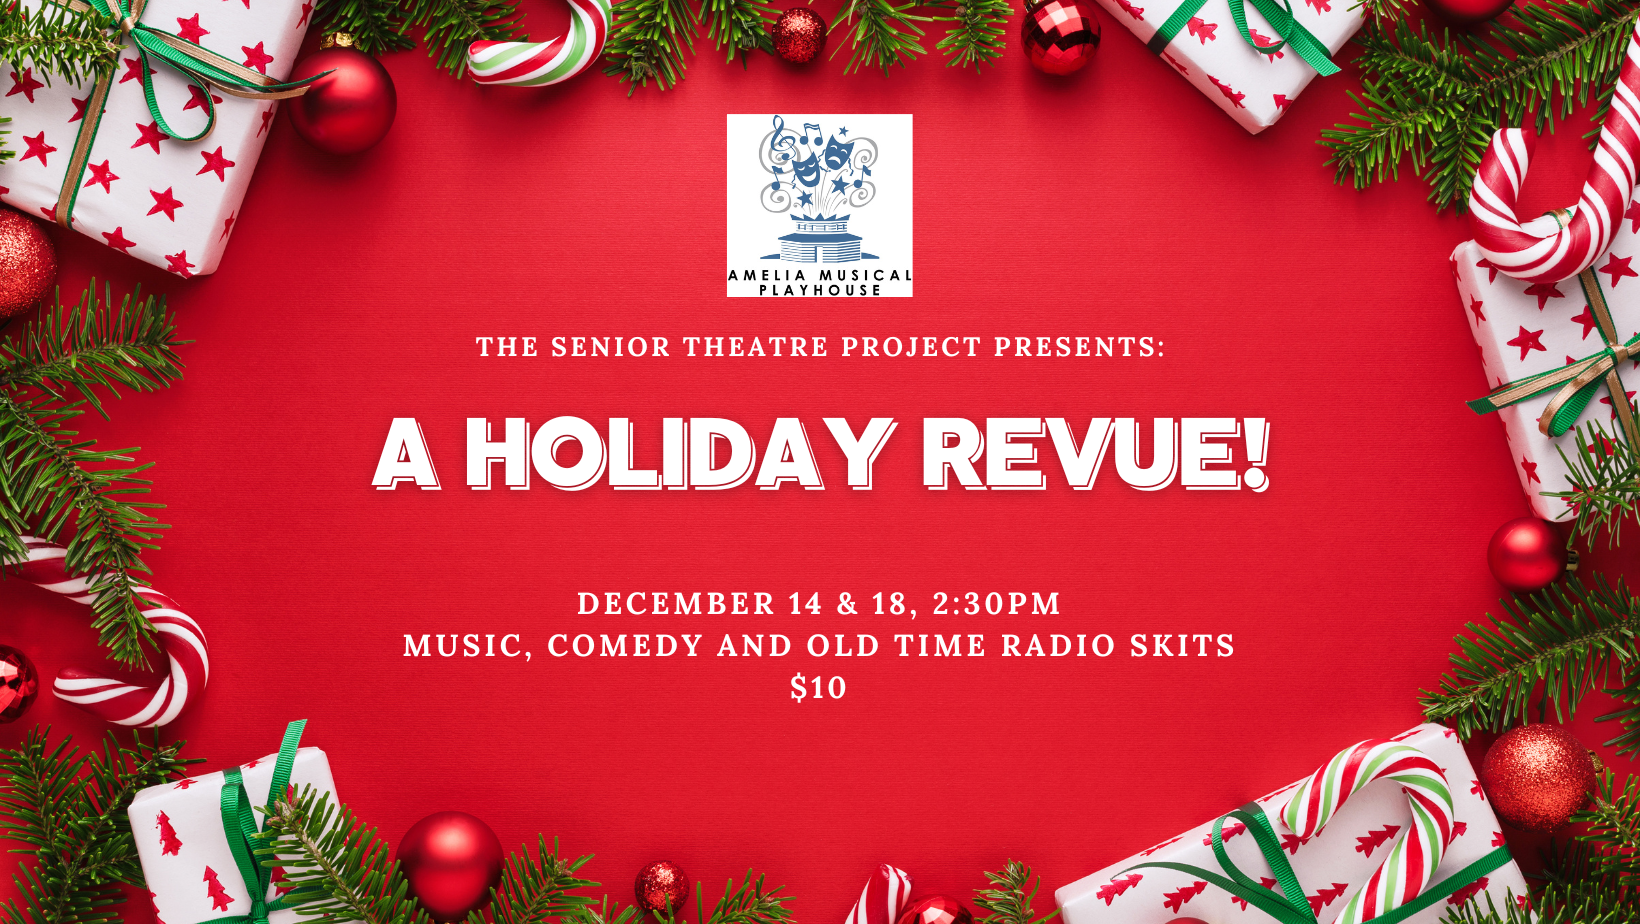 red background with Christmas presents and decorations. White text says join us for a holiday revue! Tickets $10.